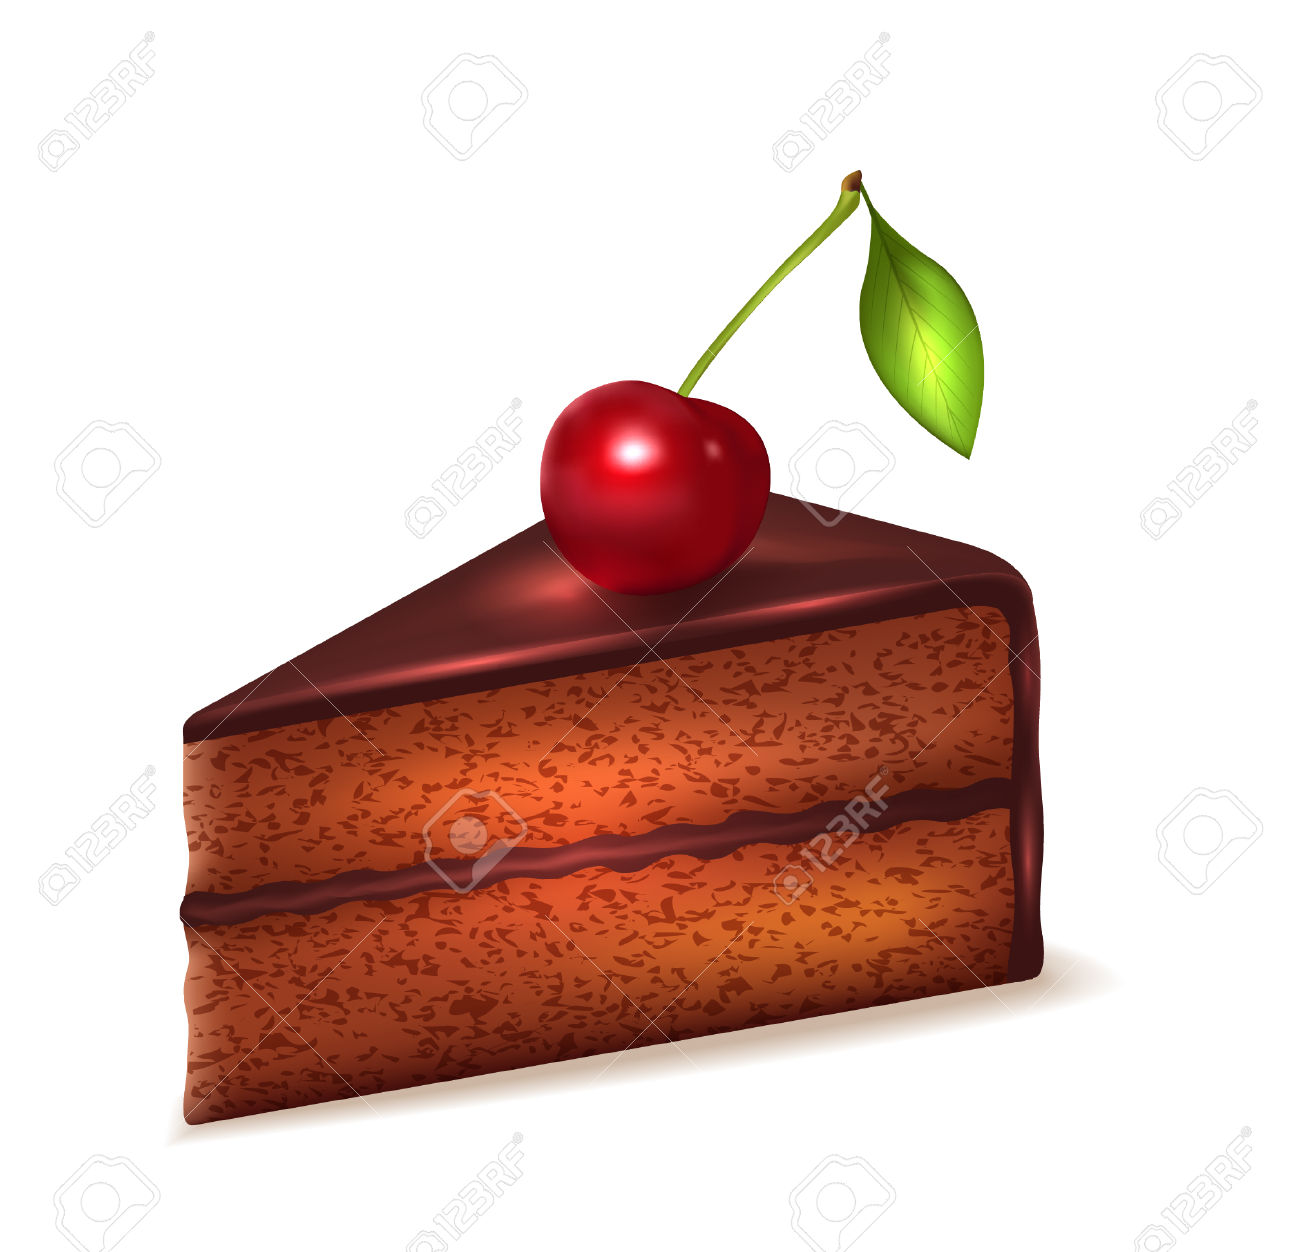 piece of chocolate cake clipart